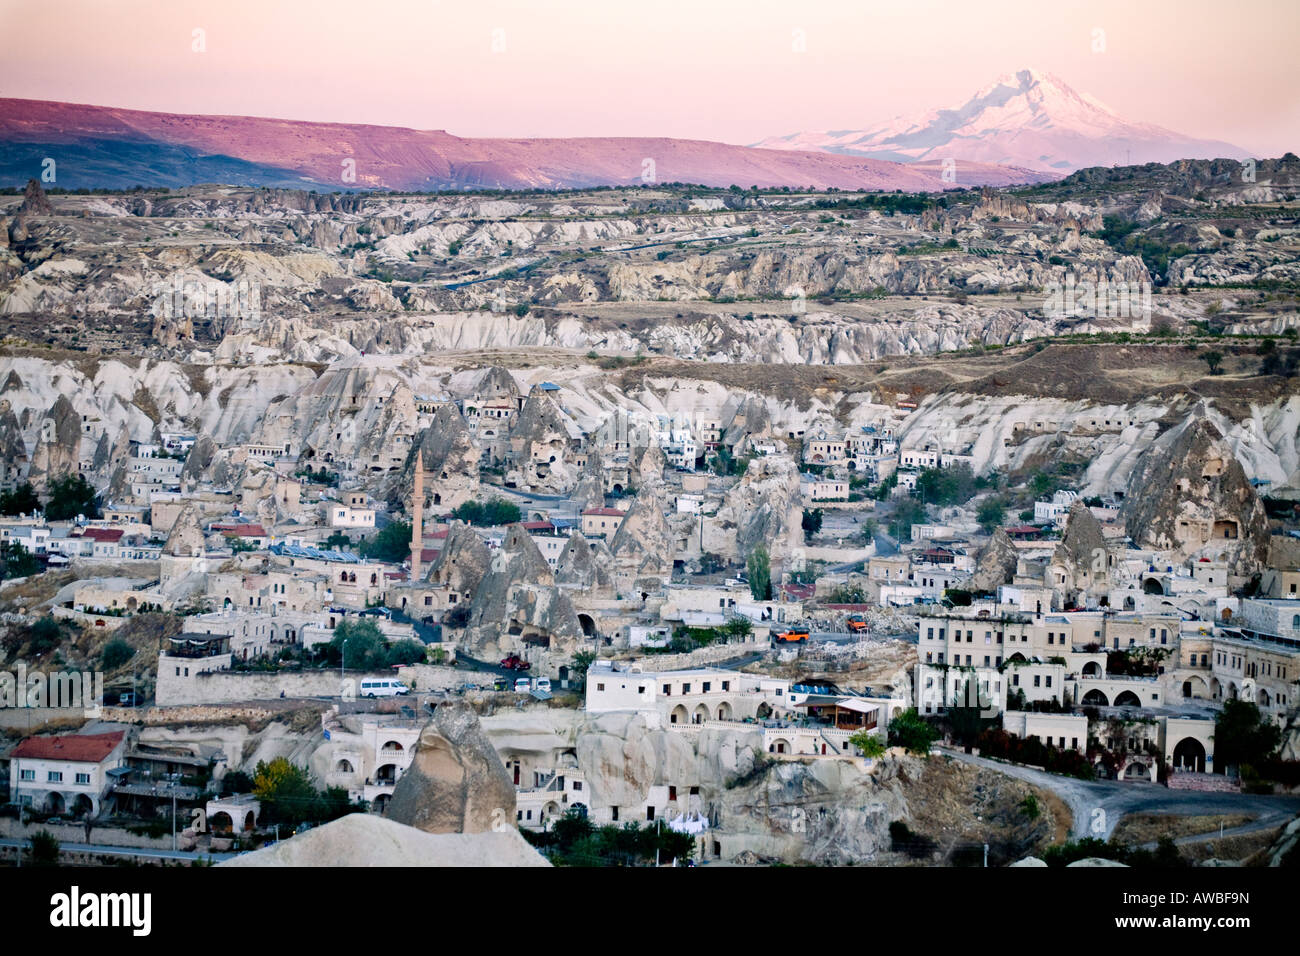 Overview of Goreme The white houses of Goreme fill the valley while snow covered Mount Erciyes shines with the setting sun Stock Photo